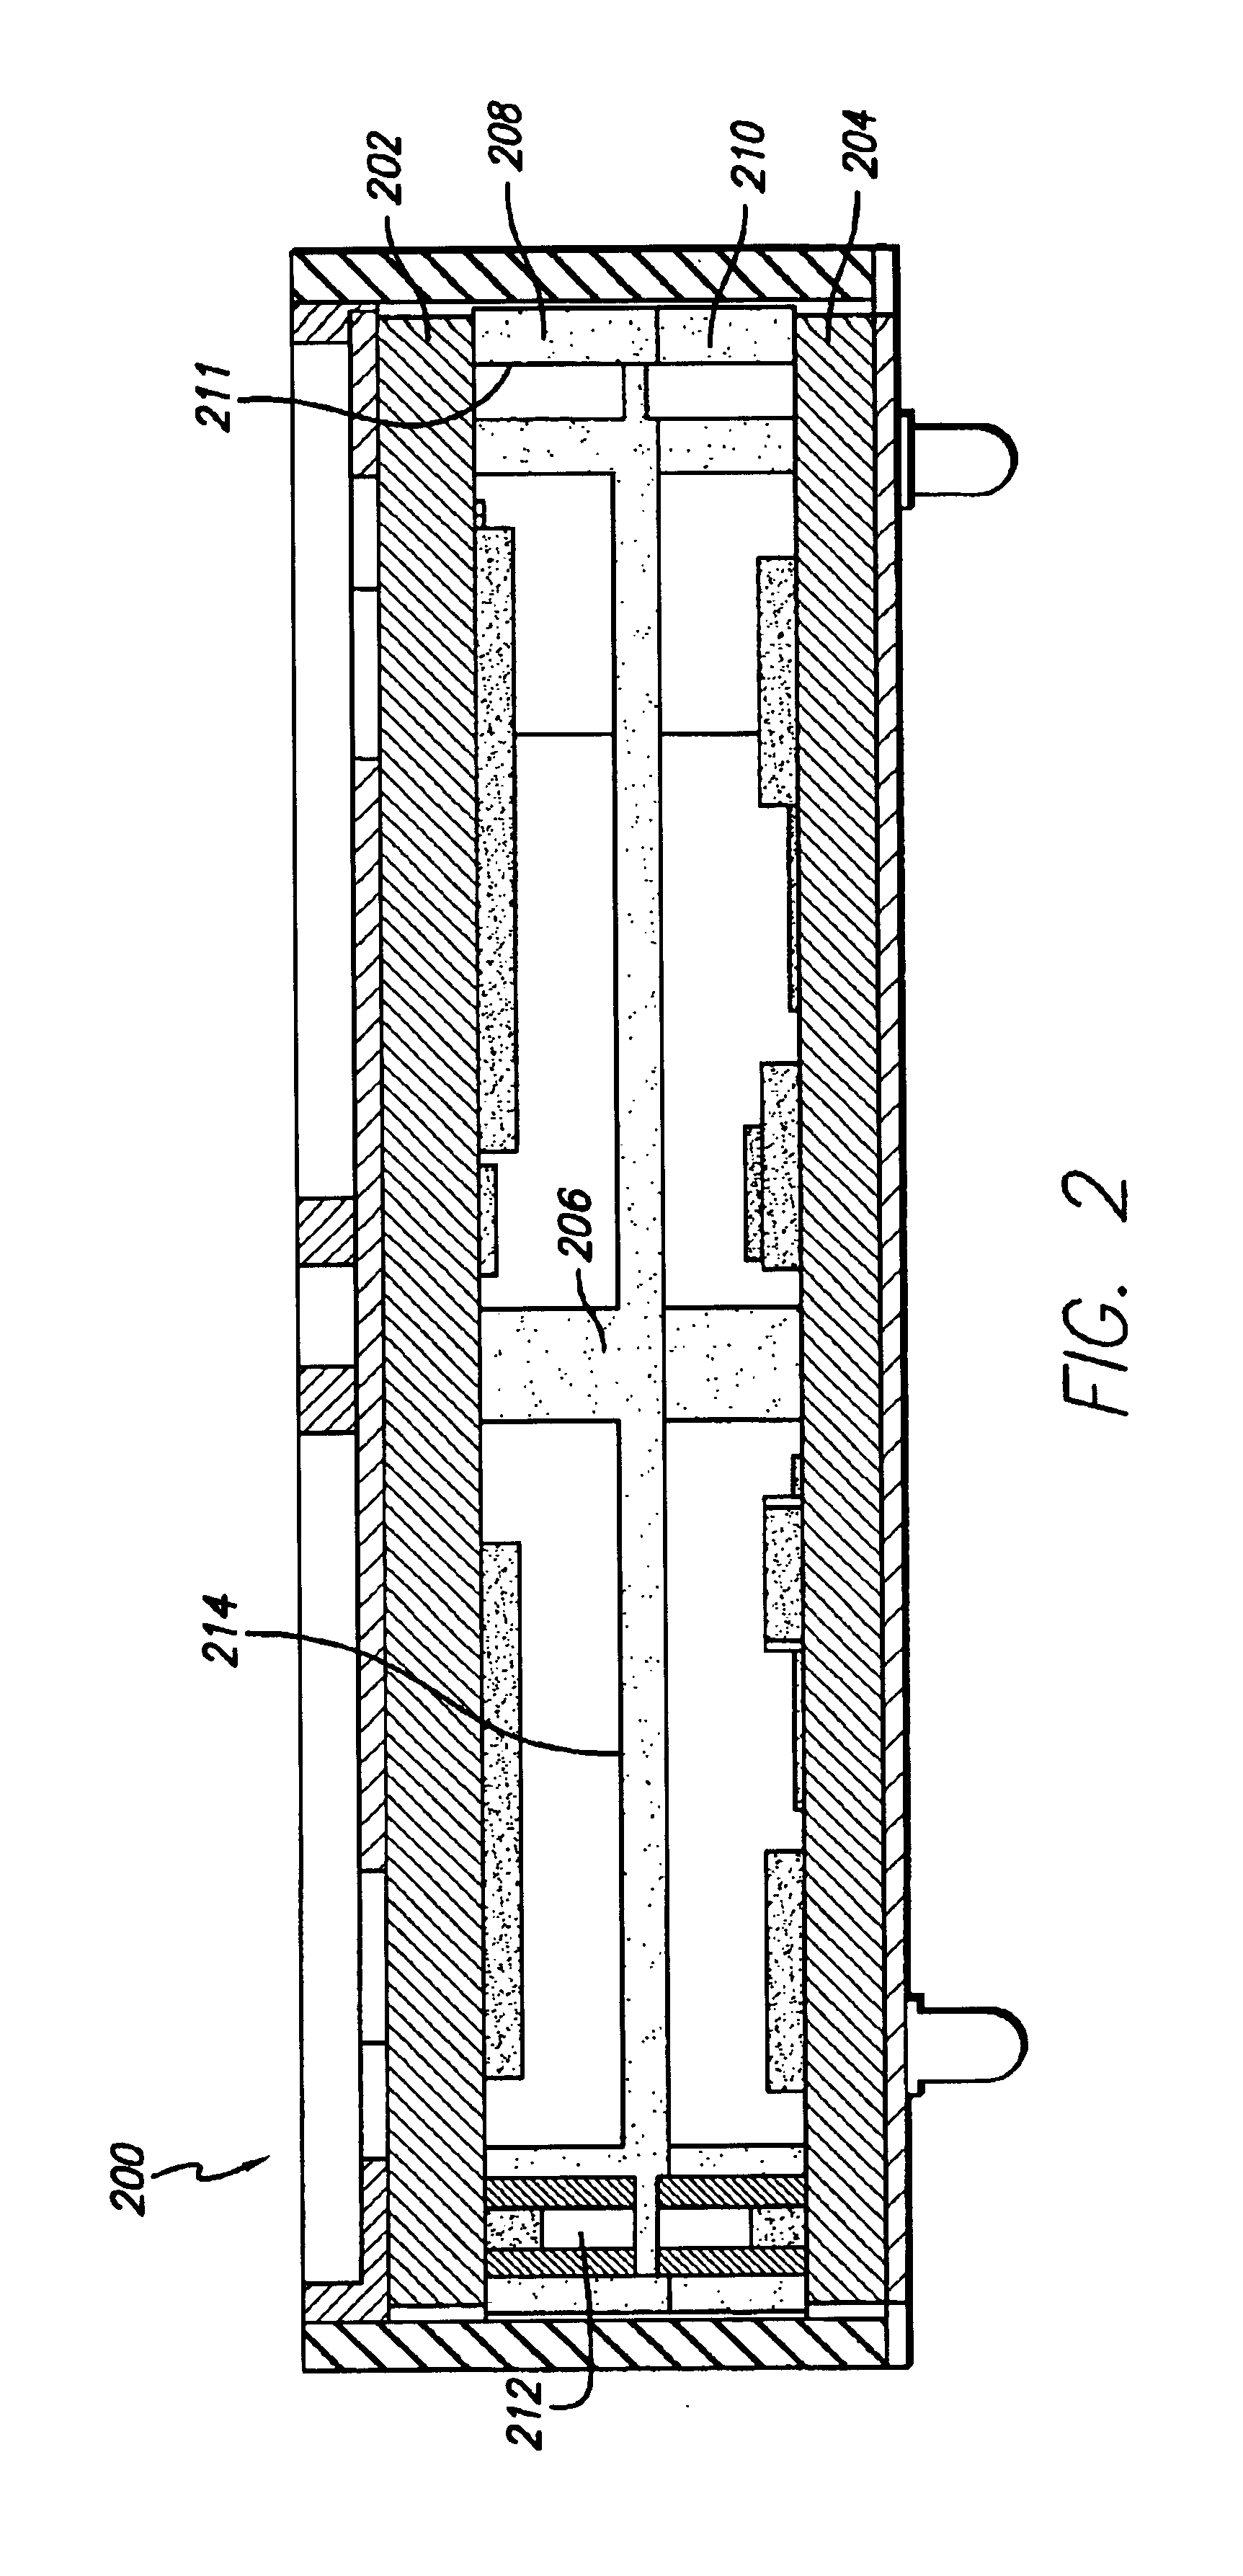 Multilayer thin film hydrogen getter and internal signal EMI shield for complex three dimensional electronic package components